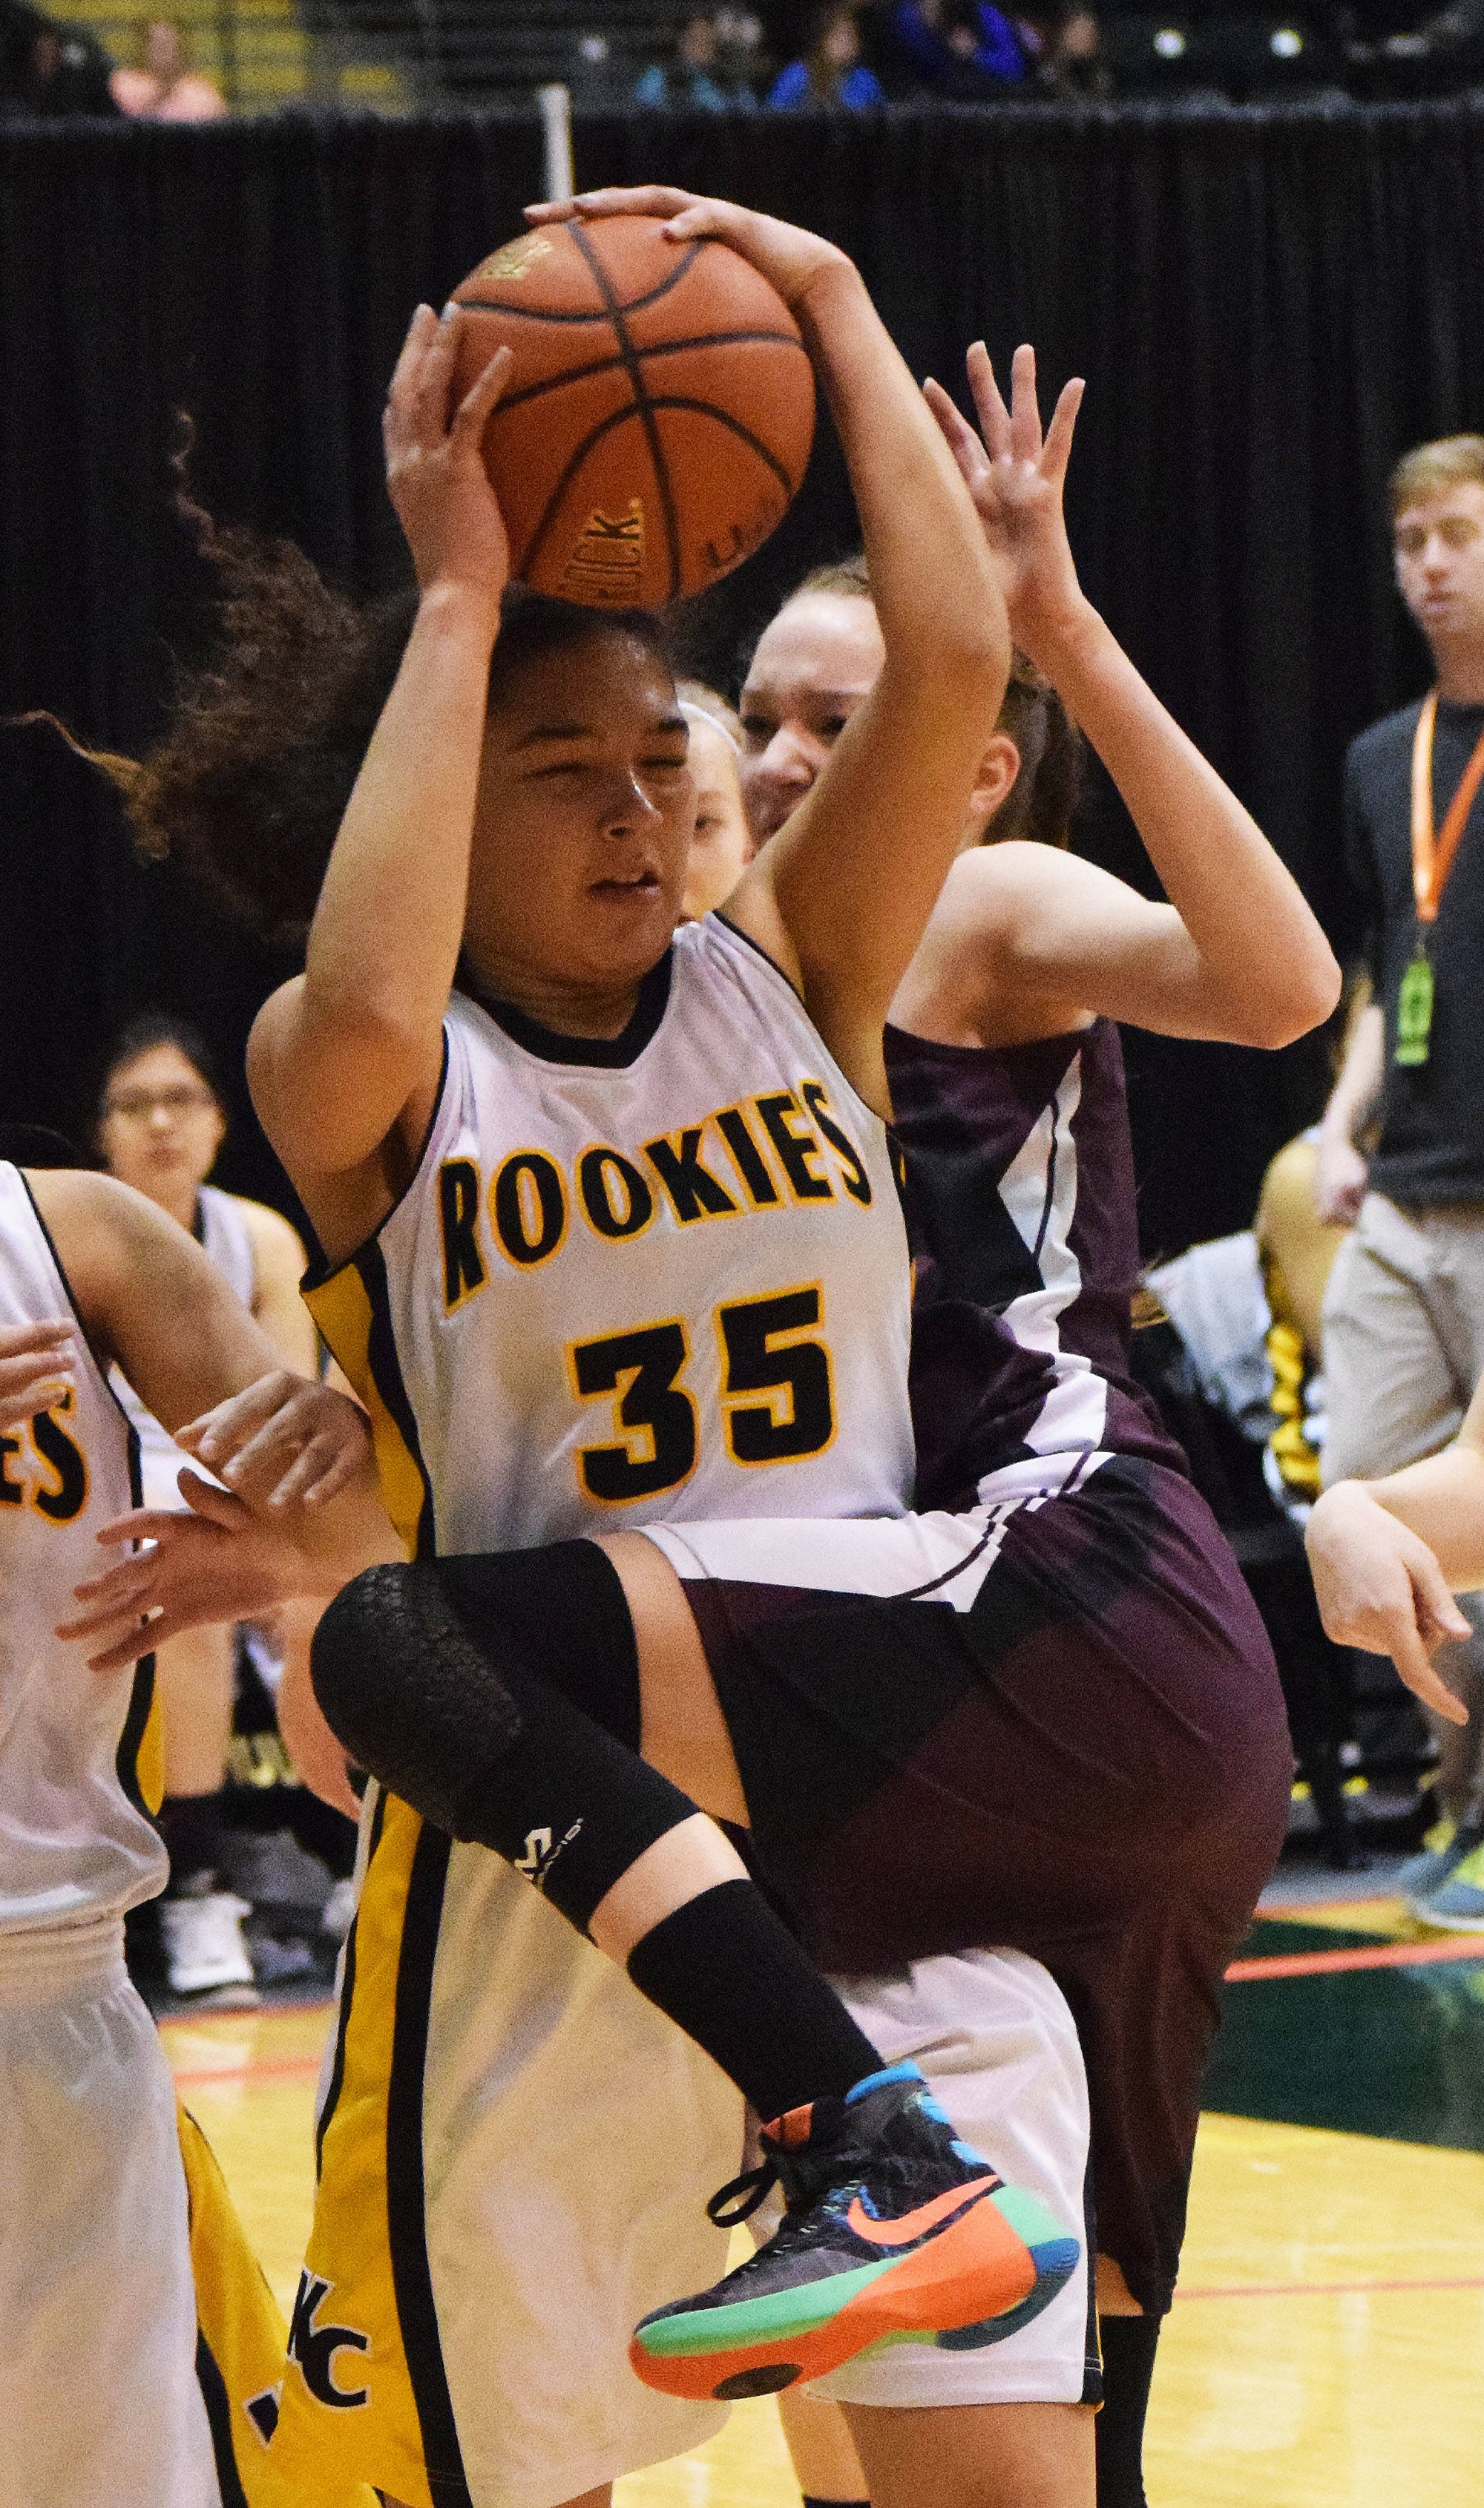 Nikolaevsk’s Elizabeth Fefelov tangles with King Cove’s Jalaya Duarte (35) Thursday, March 16, 2017, afternoon at the Class 1A state basketball tournament at the Alaska Airlines Center in Anchorage. (Photo by Joey Klecka/Peninsula Clarion)